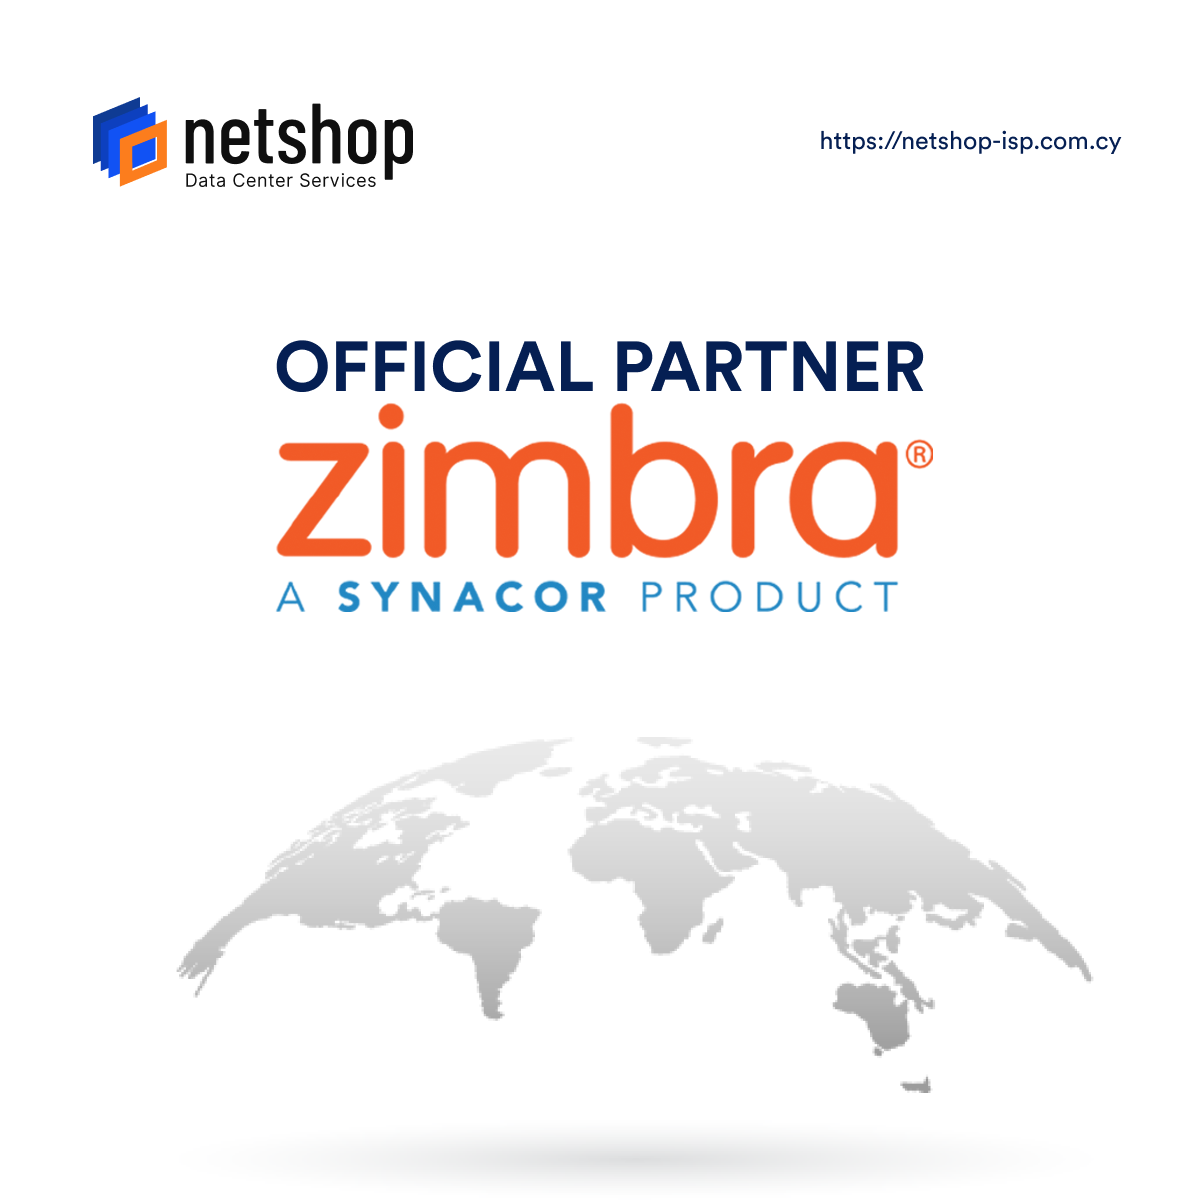 NetShop ISP Announces Partnership with Synacor for Zimbra Email